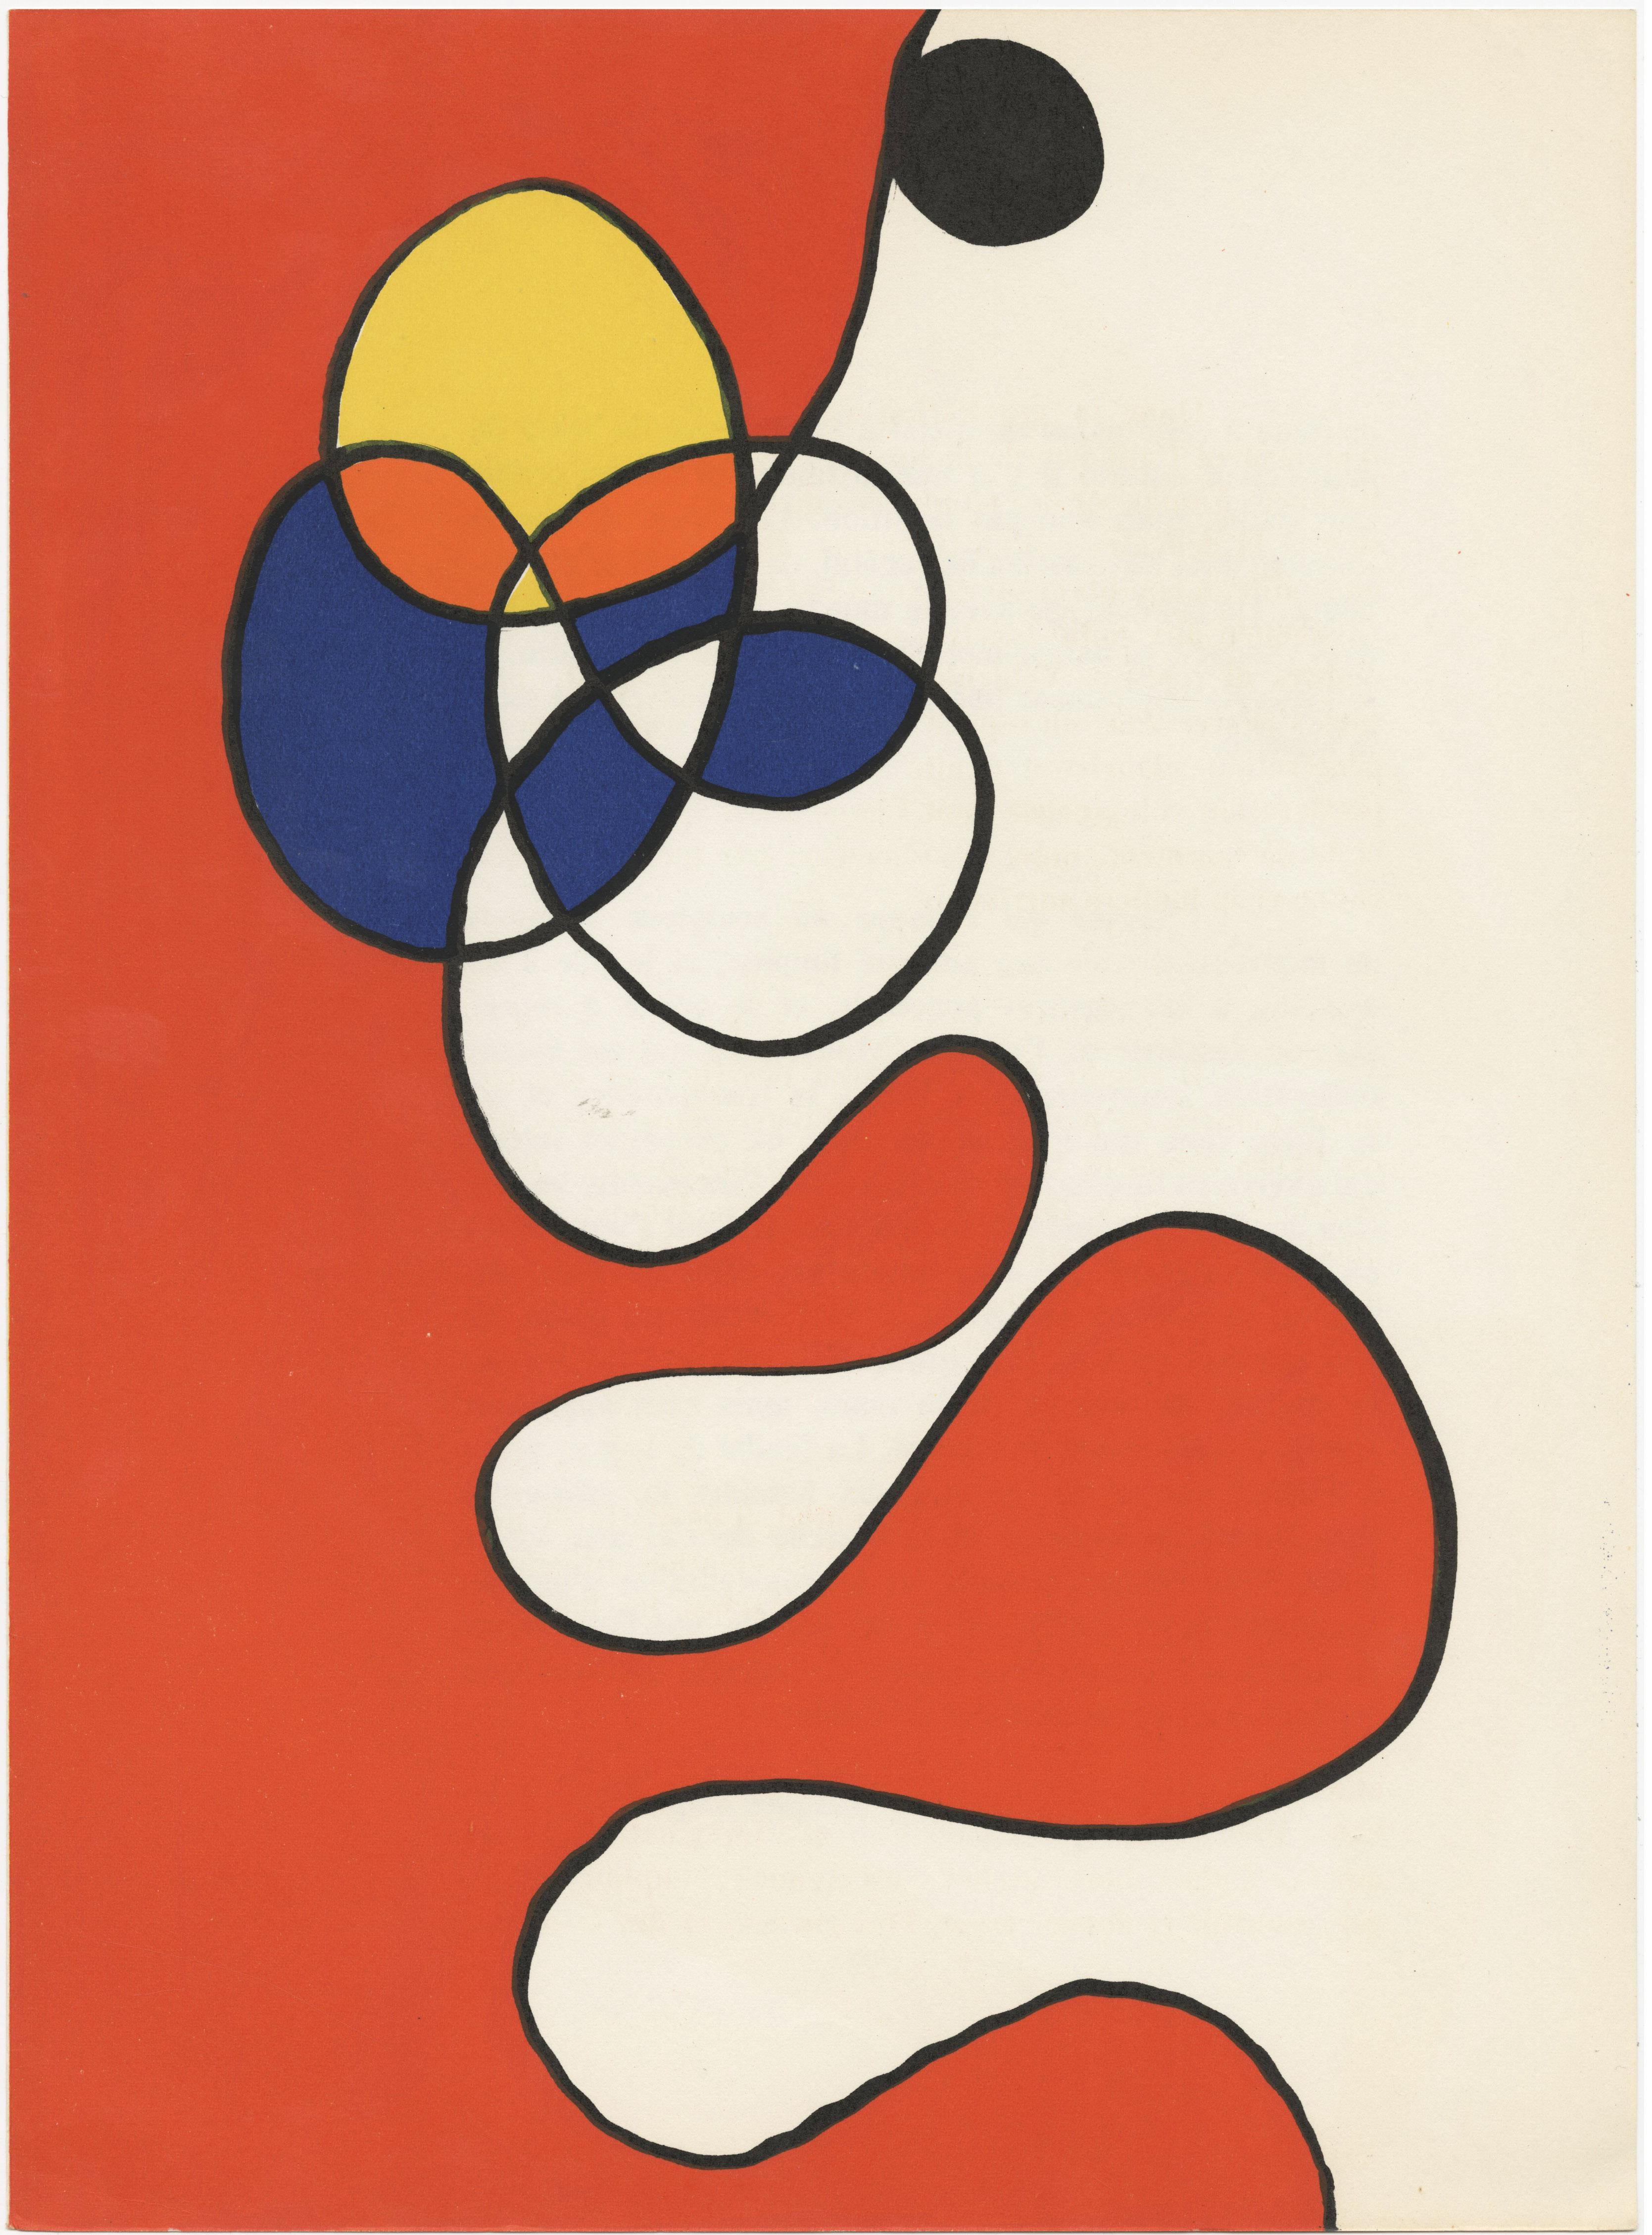 Alexander Calder Abstract Print - Untitled (red yellow, orange and blue circles and squiggles)